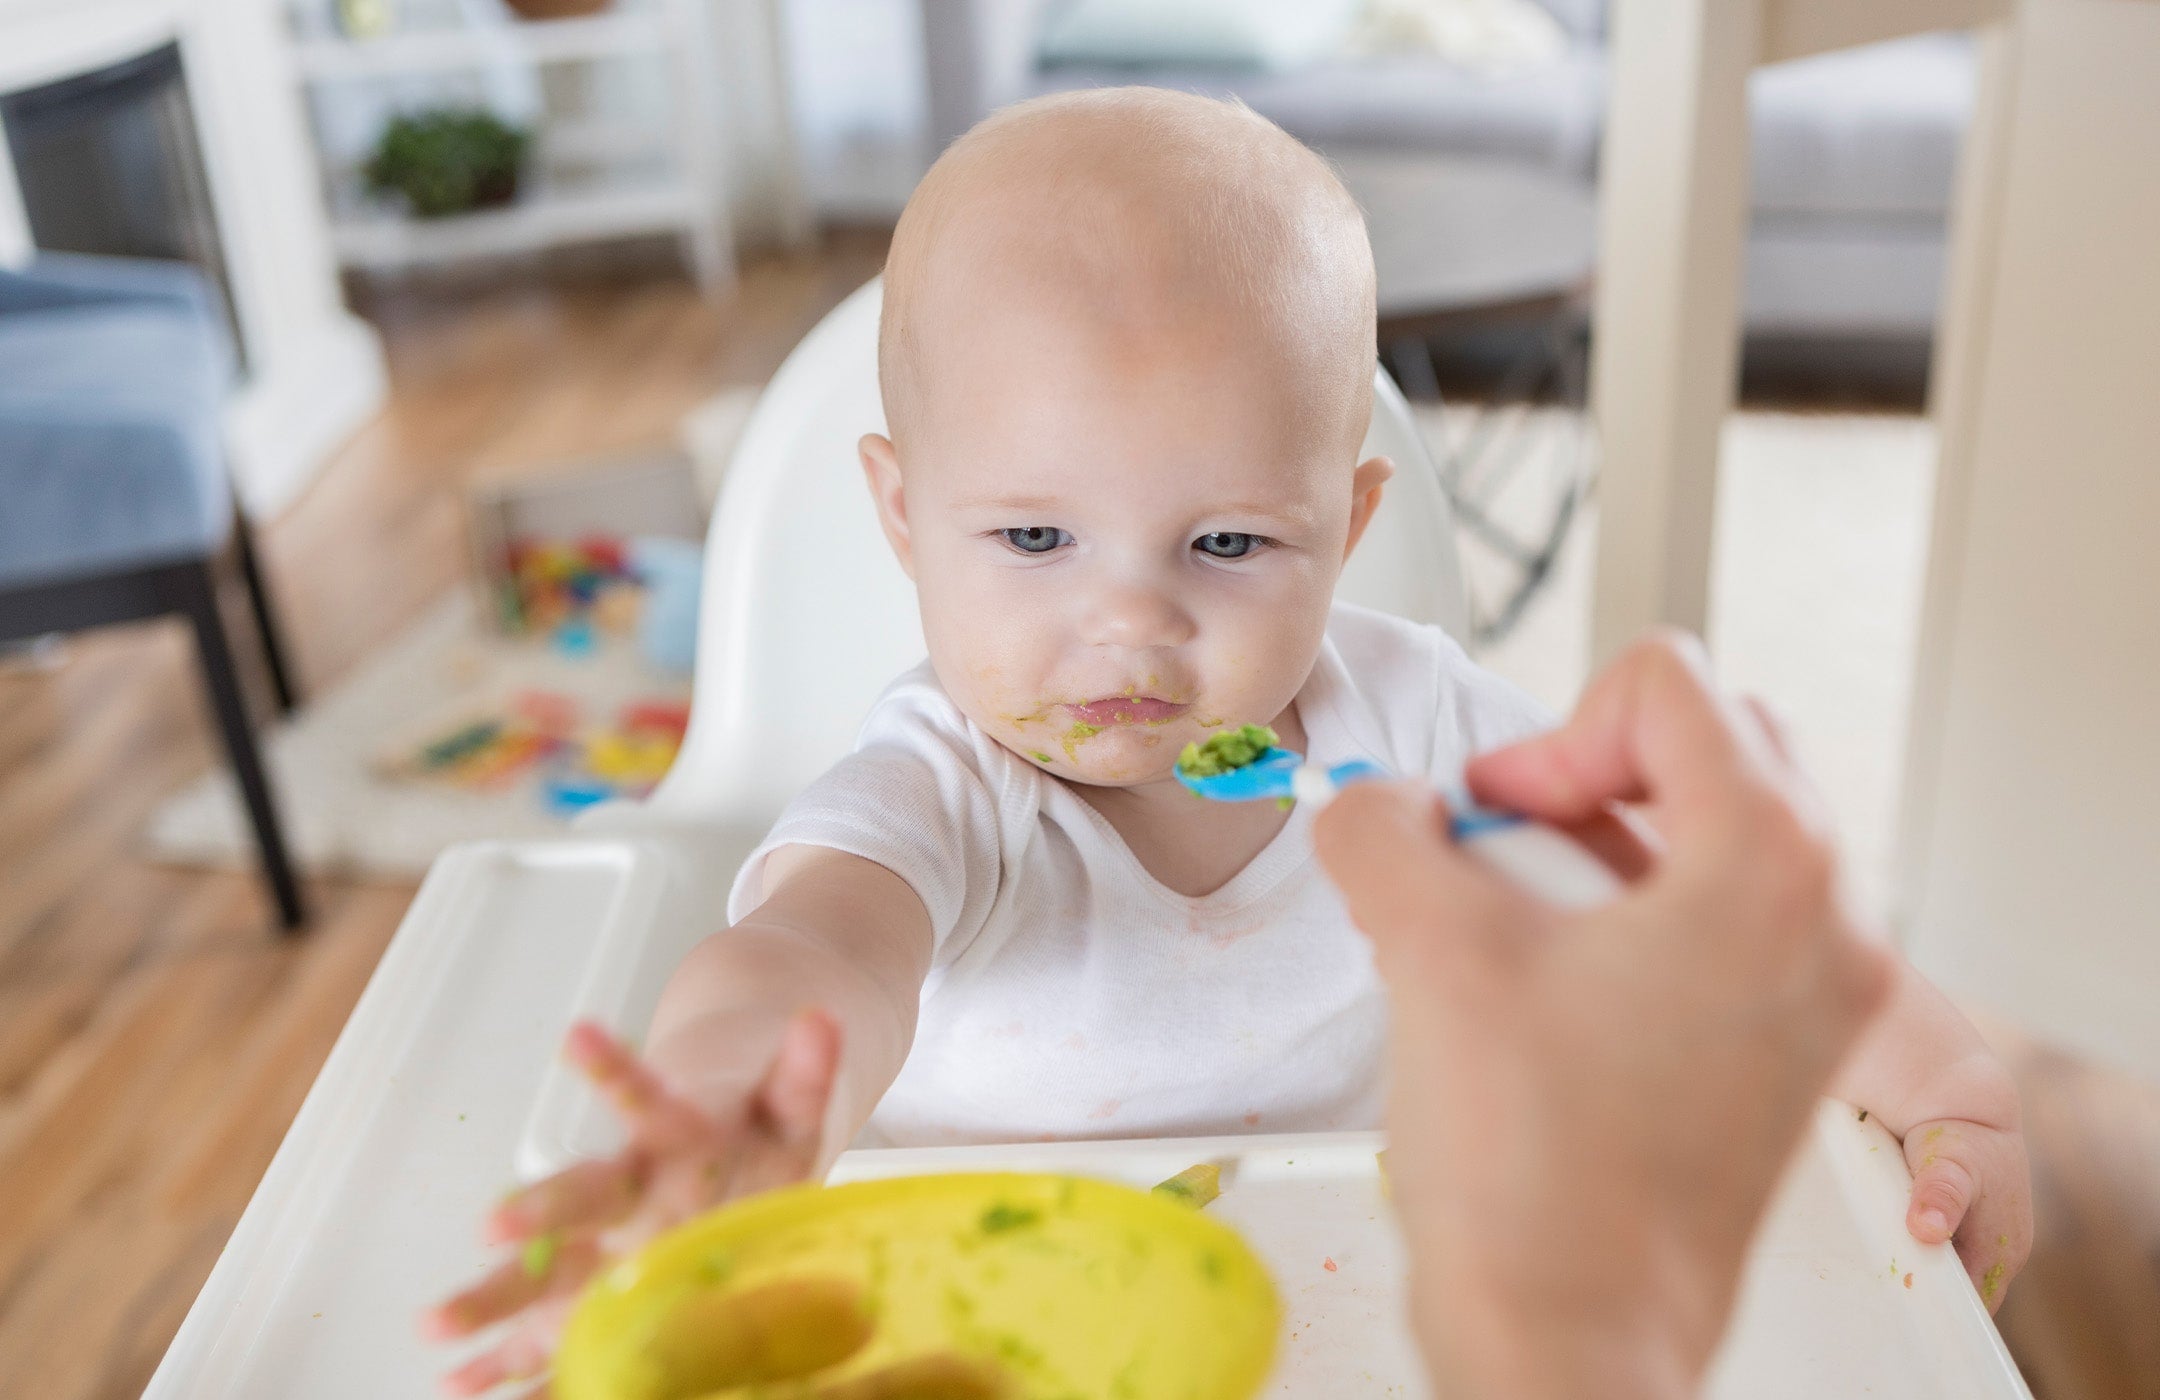 The Pediatrician Mom Answers 4 FAQs on Starting Solids